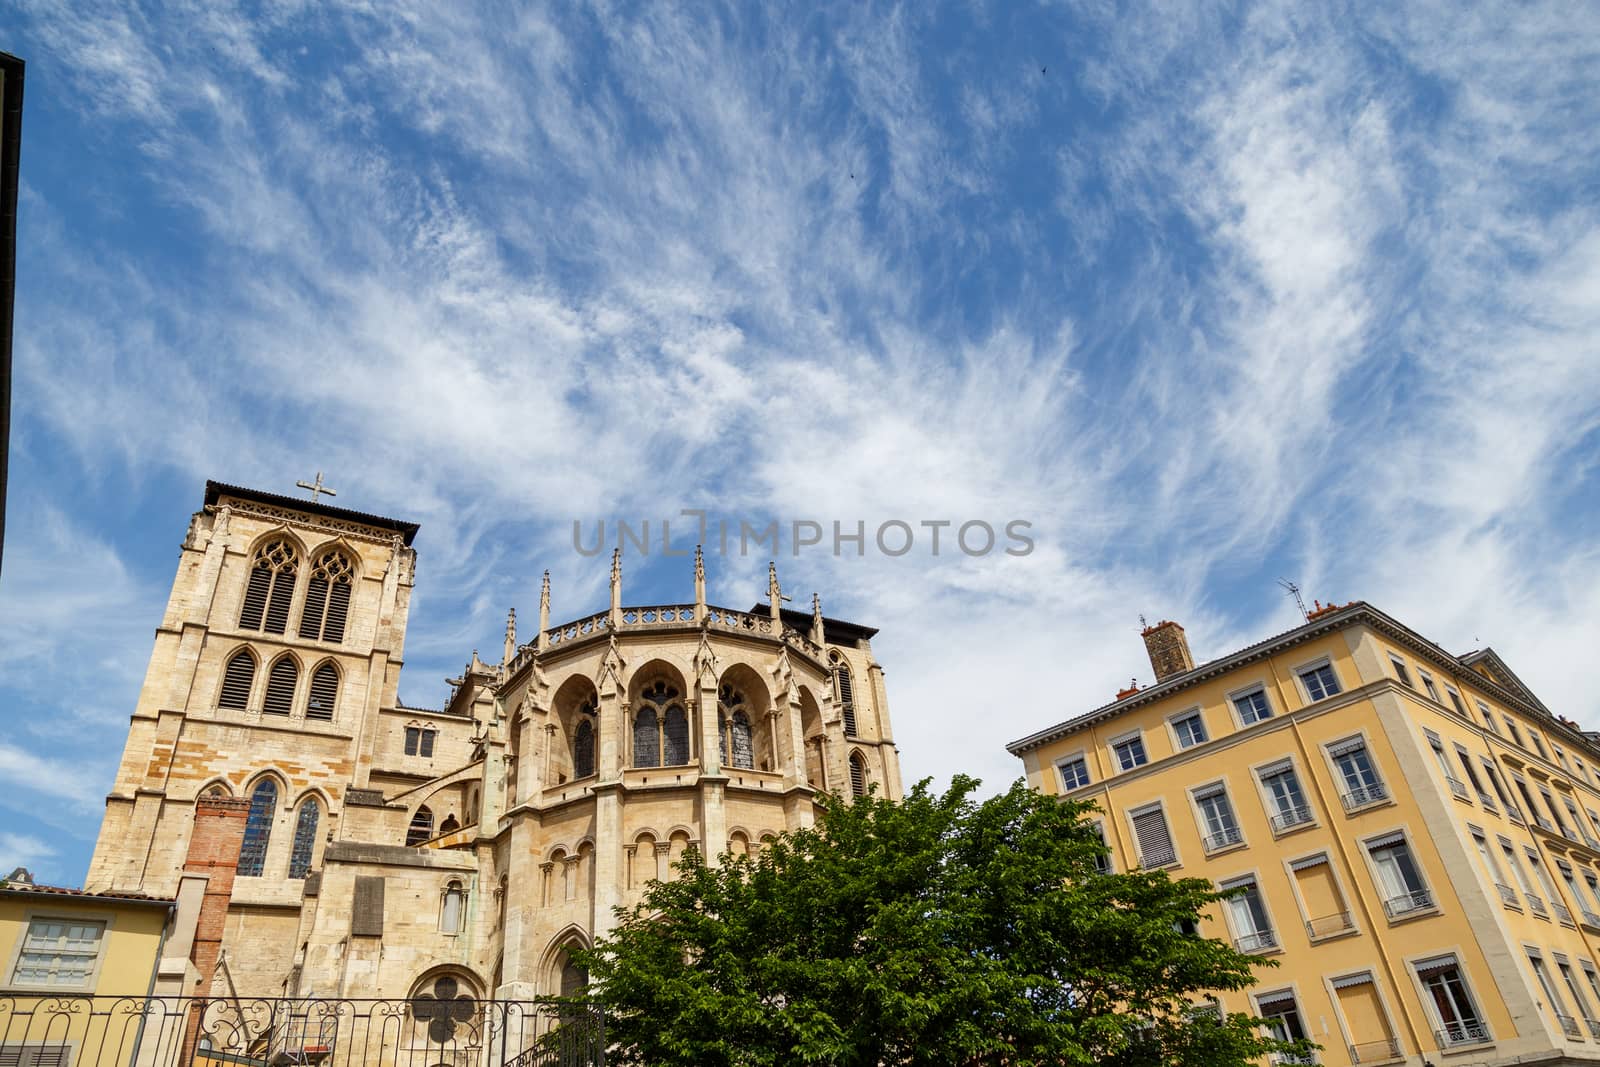 Lyon, France - CIRCA 2019: Picturesque historical Lyon Old Town buildings on the bank of Saone River. Lyon, Region Auvergne-Rhone-Alpes, France. by dugulan